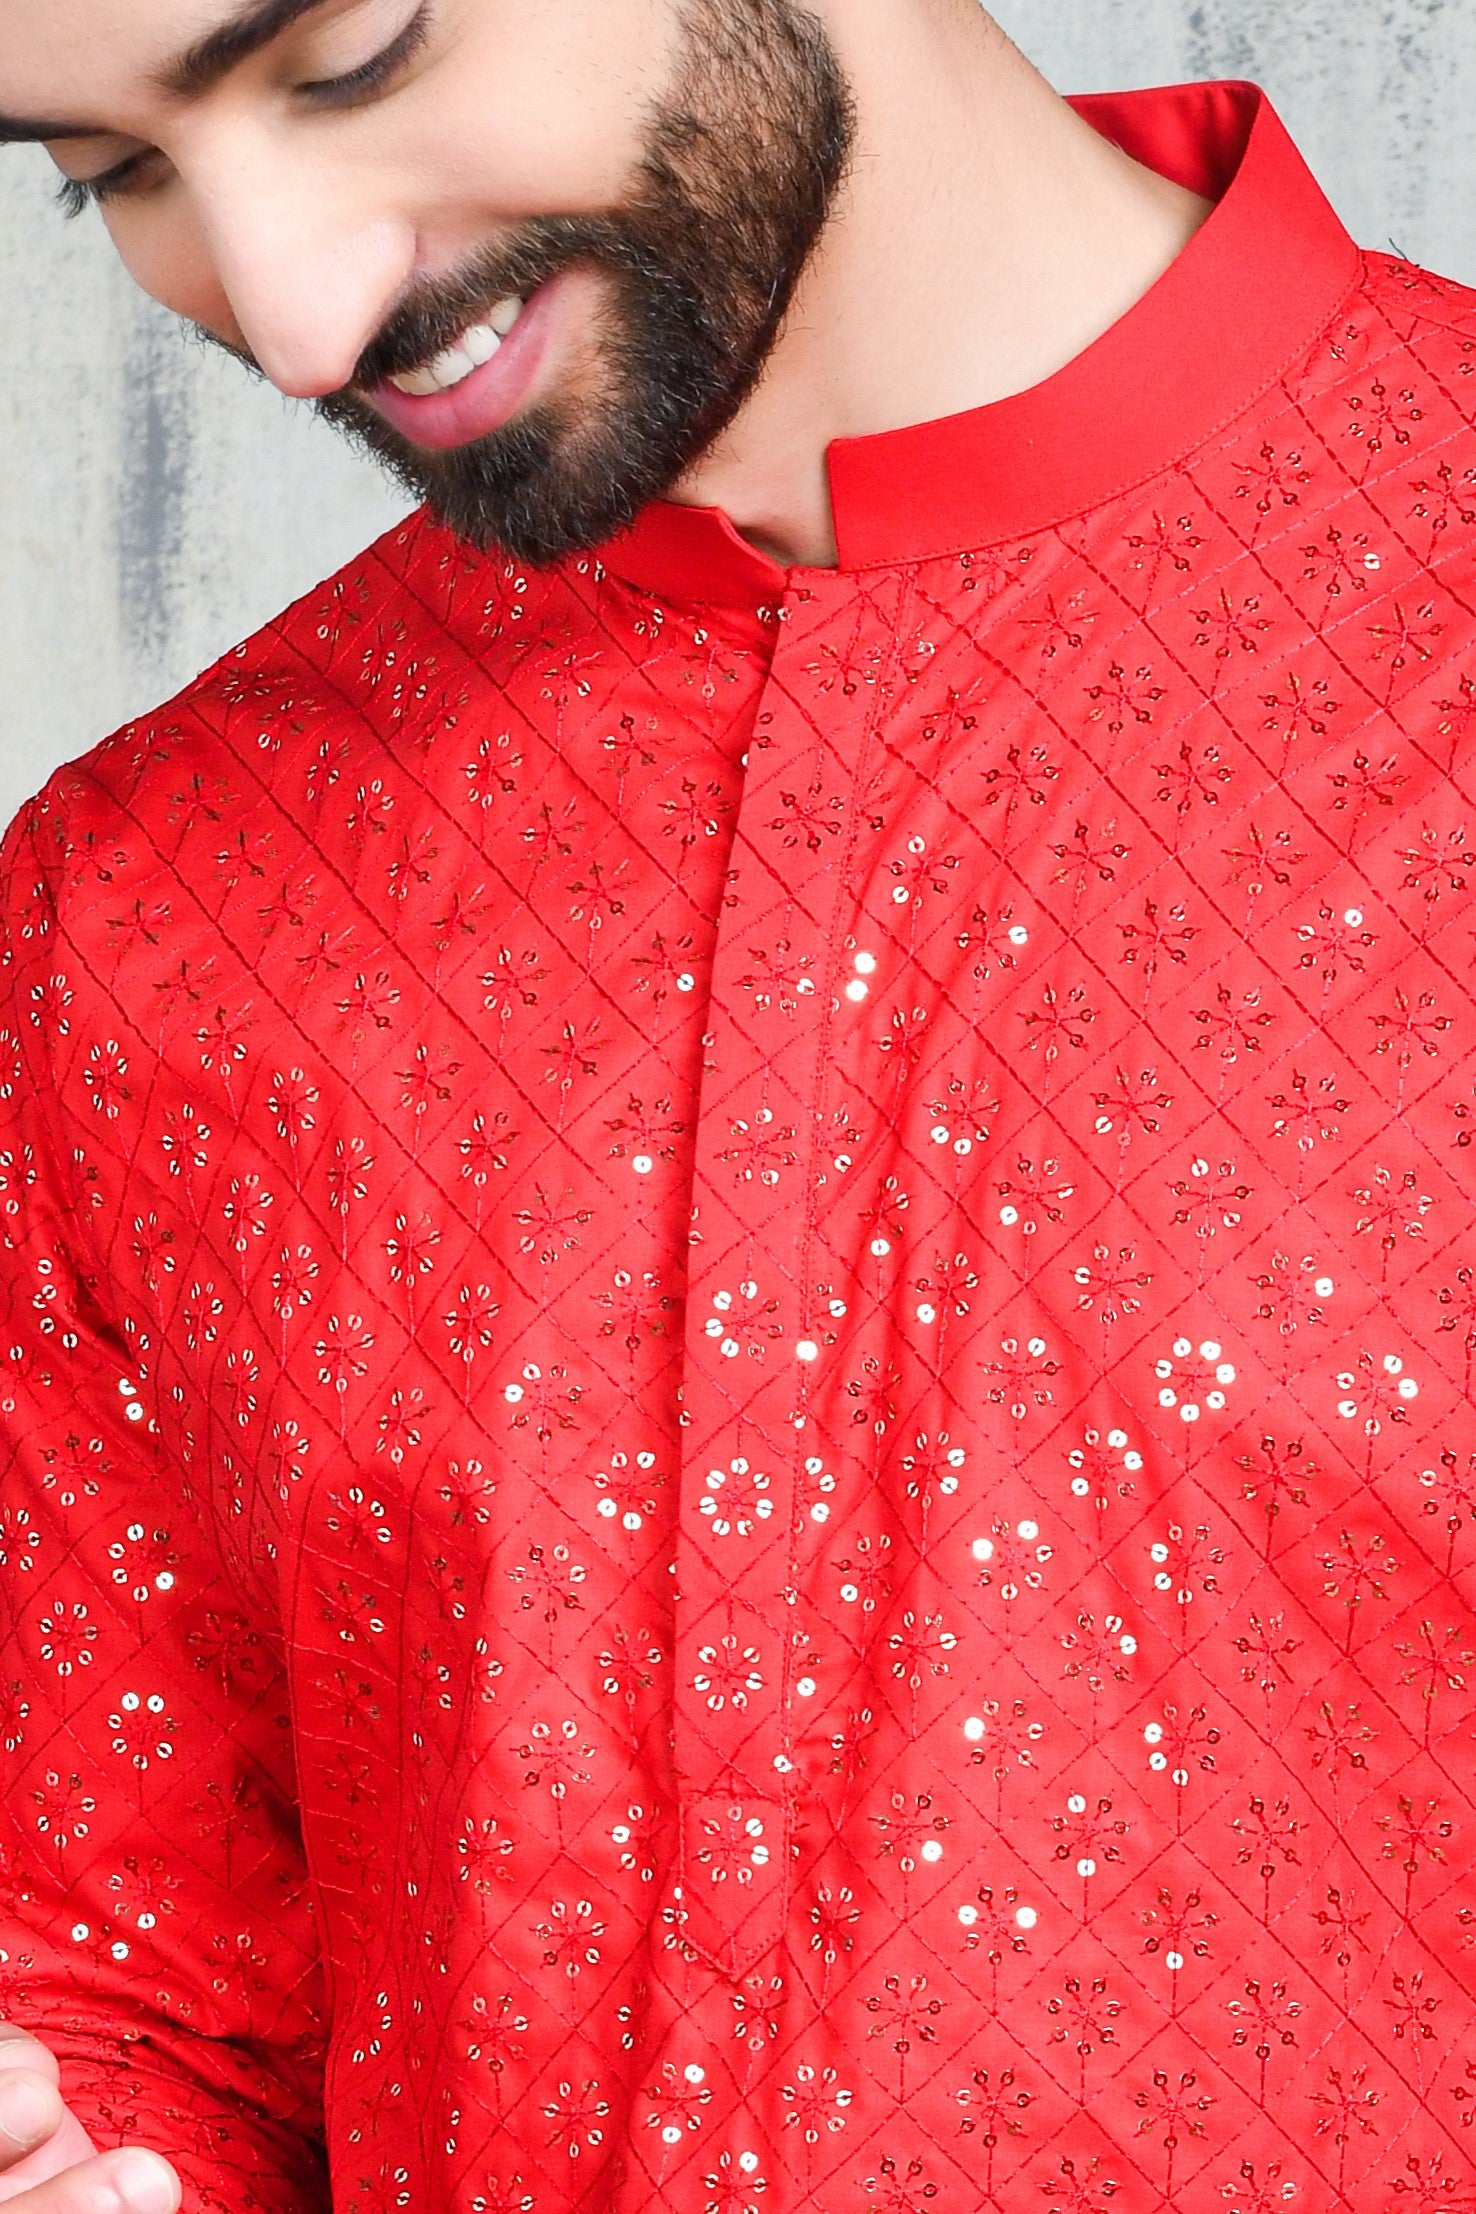 EMBROIDERED SCARLET RED KURTA PYJAMA SET WITH ALL OVER SEQUIN DESIGN